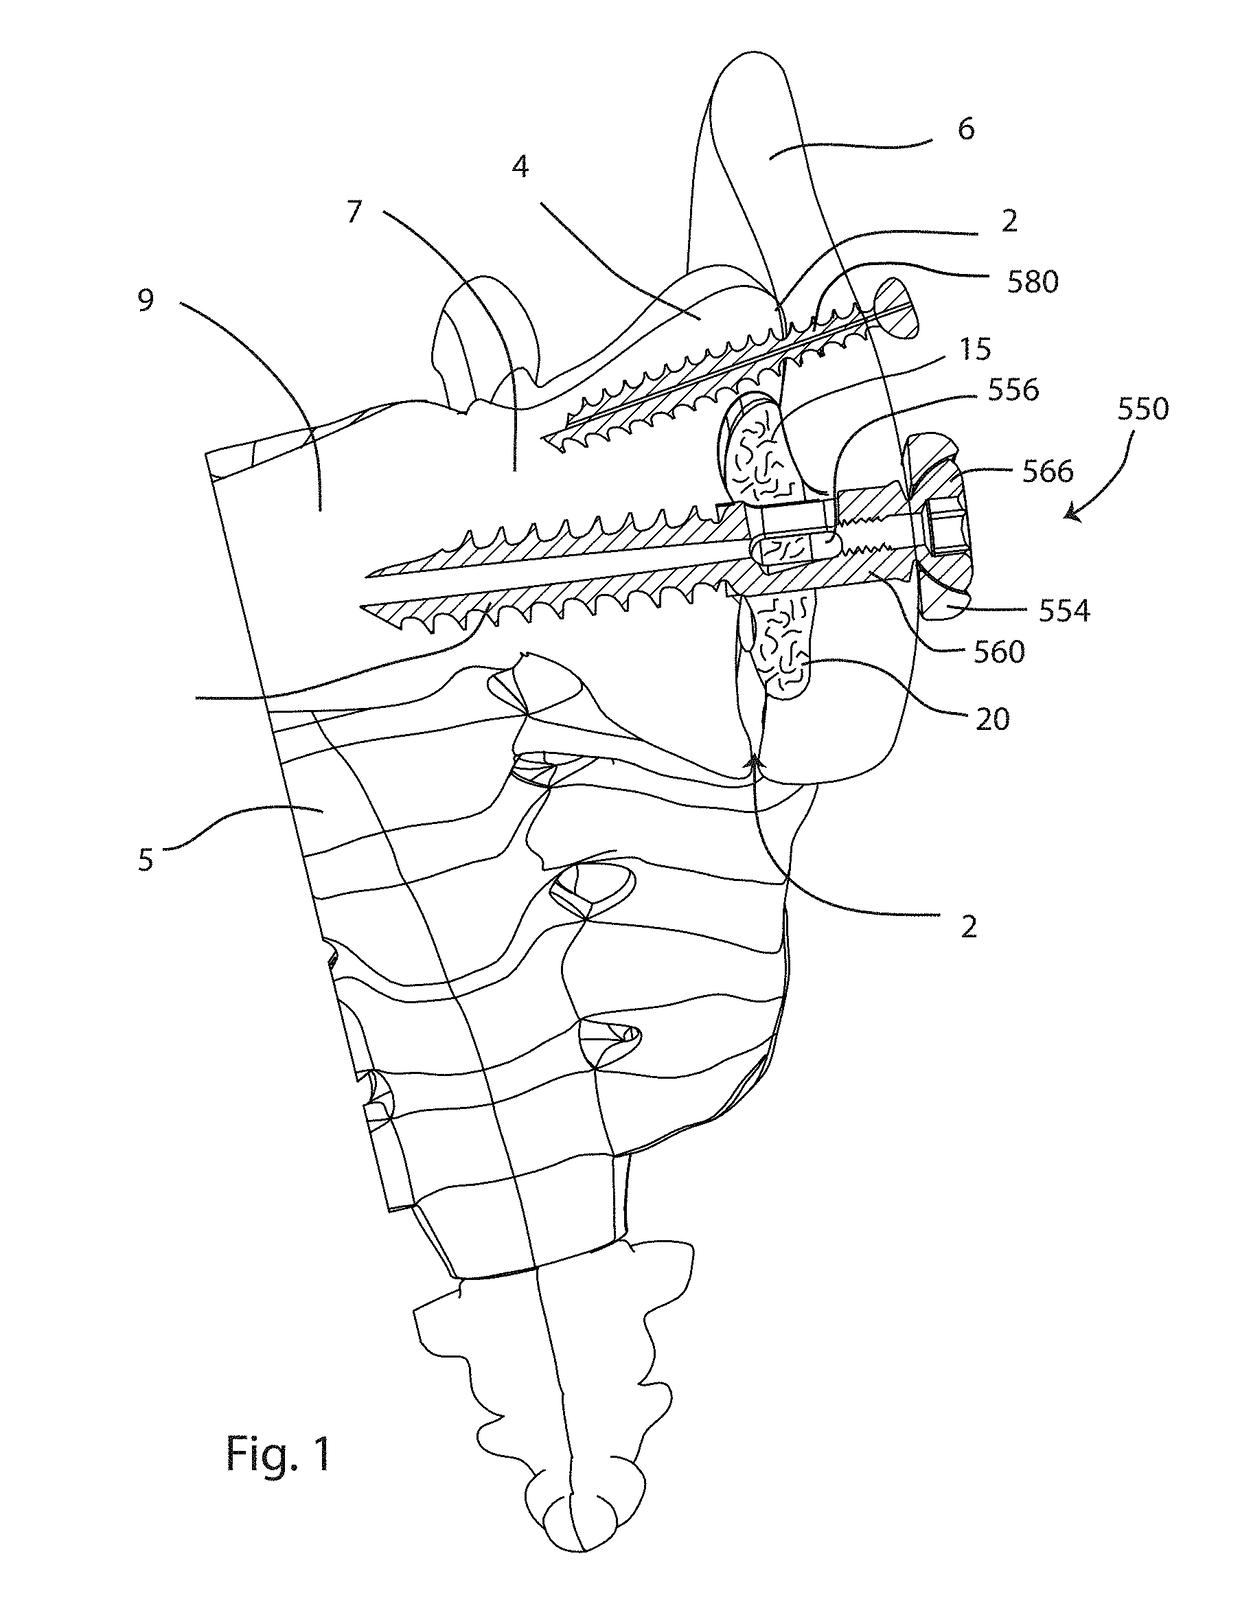 Joint fusion implant and methods